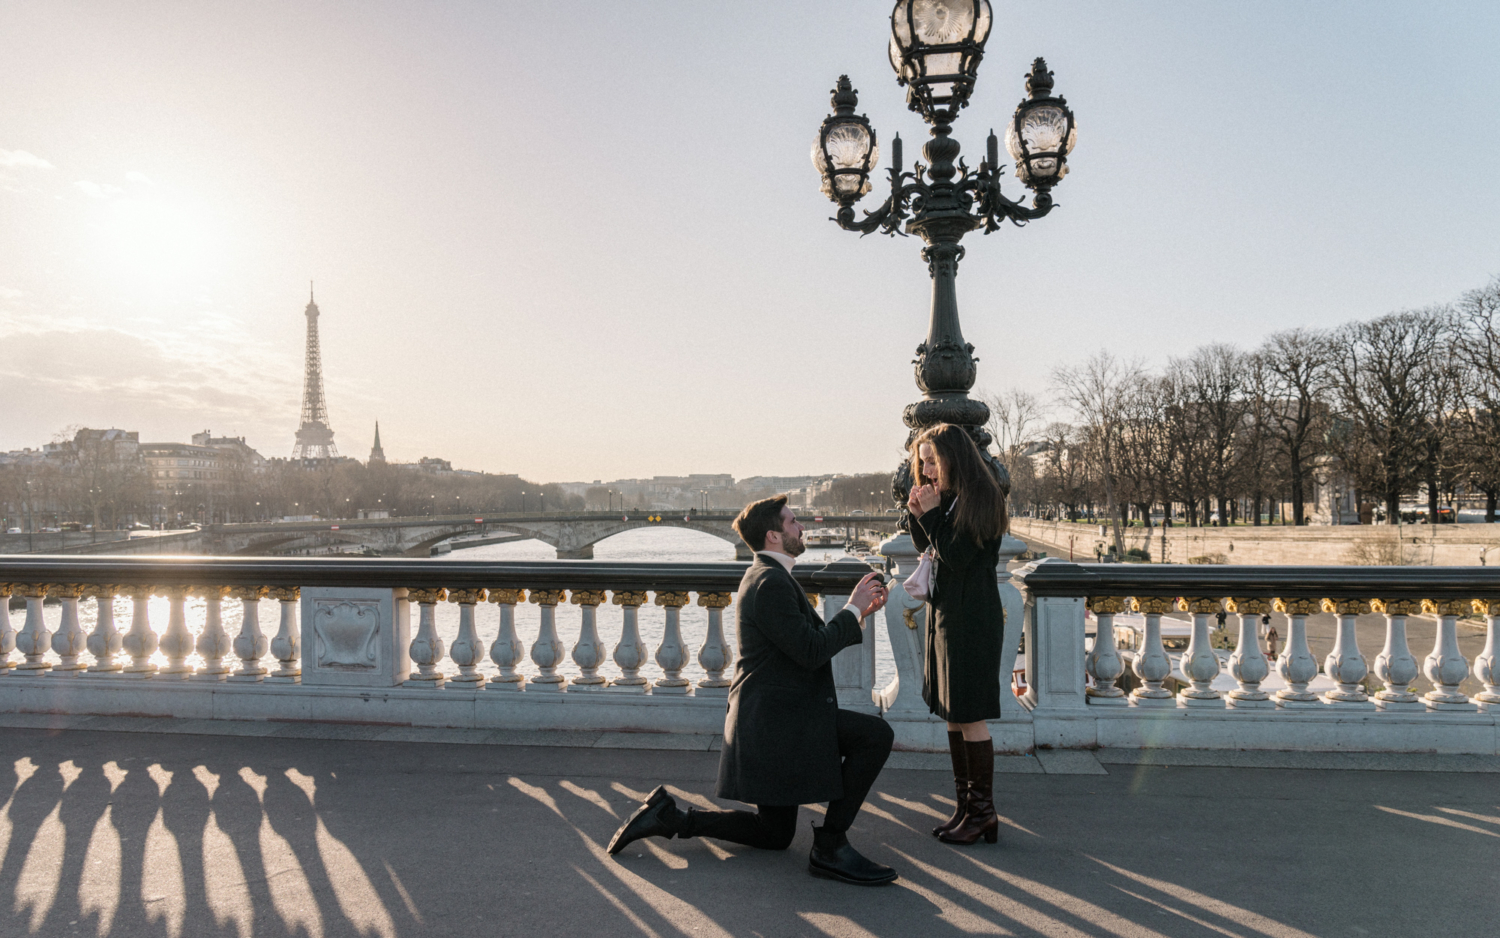 man proposes marriage to woman with view of eiffel tower